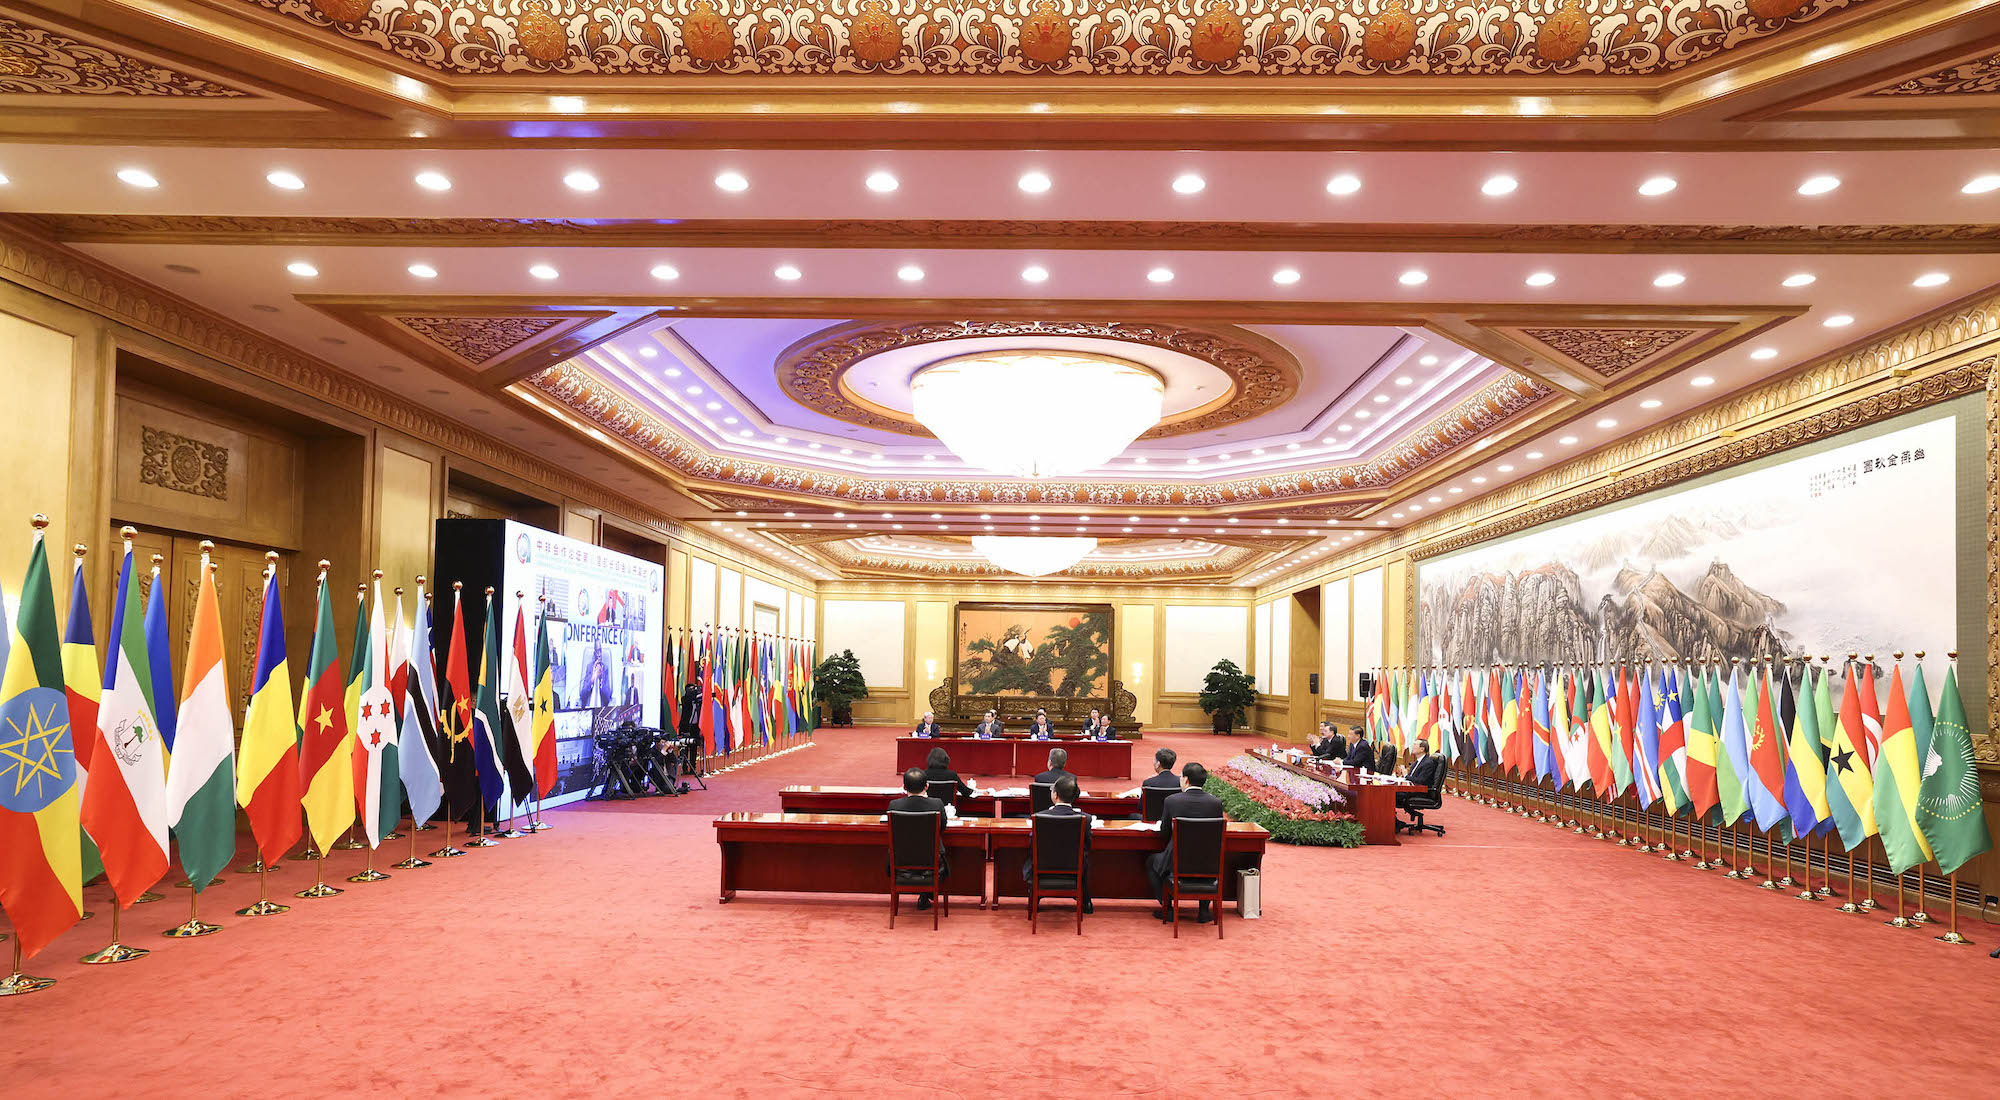 Eighth Ministerial Conference of the Forum on China-Africa Cooperation (FOCAC)